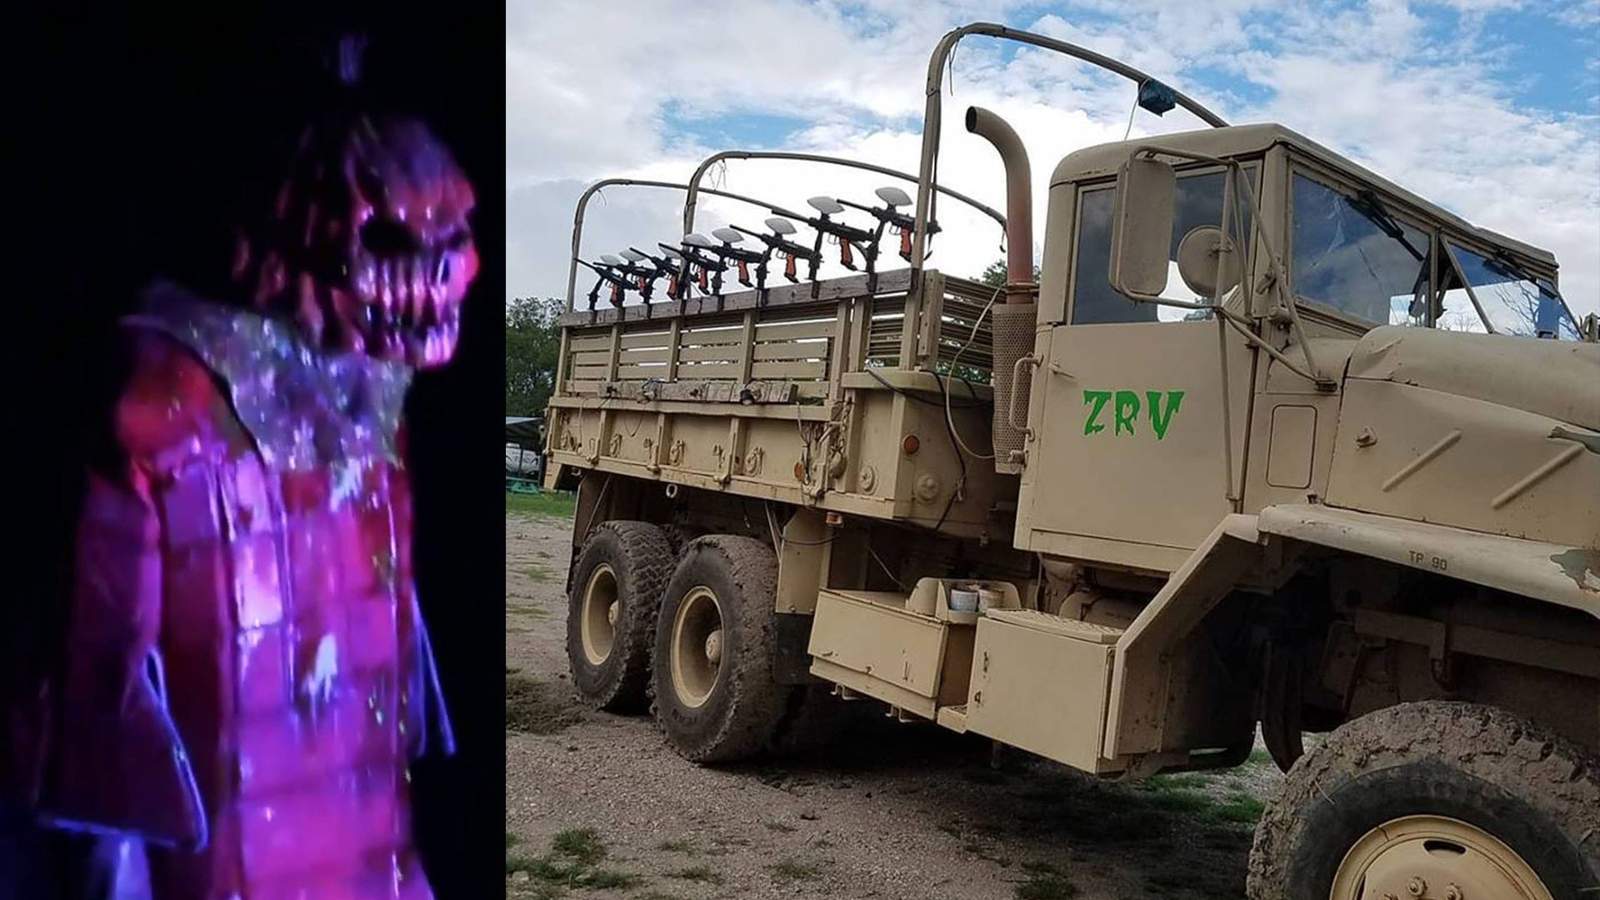 This Safari Lets You Shoot Paintballs at Zombies From A Military Truck and I’m So There